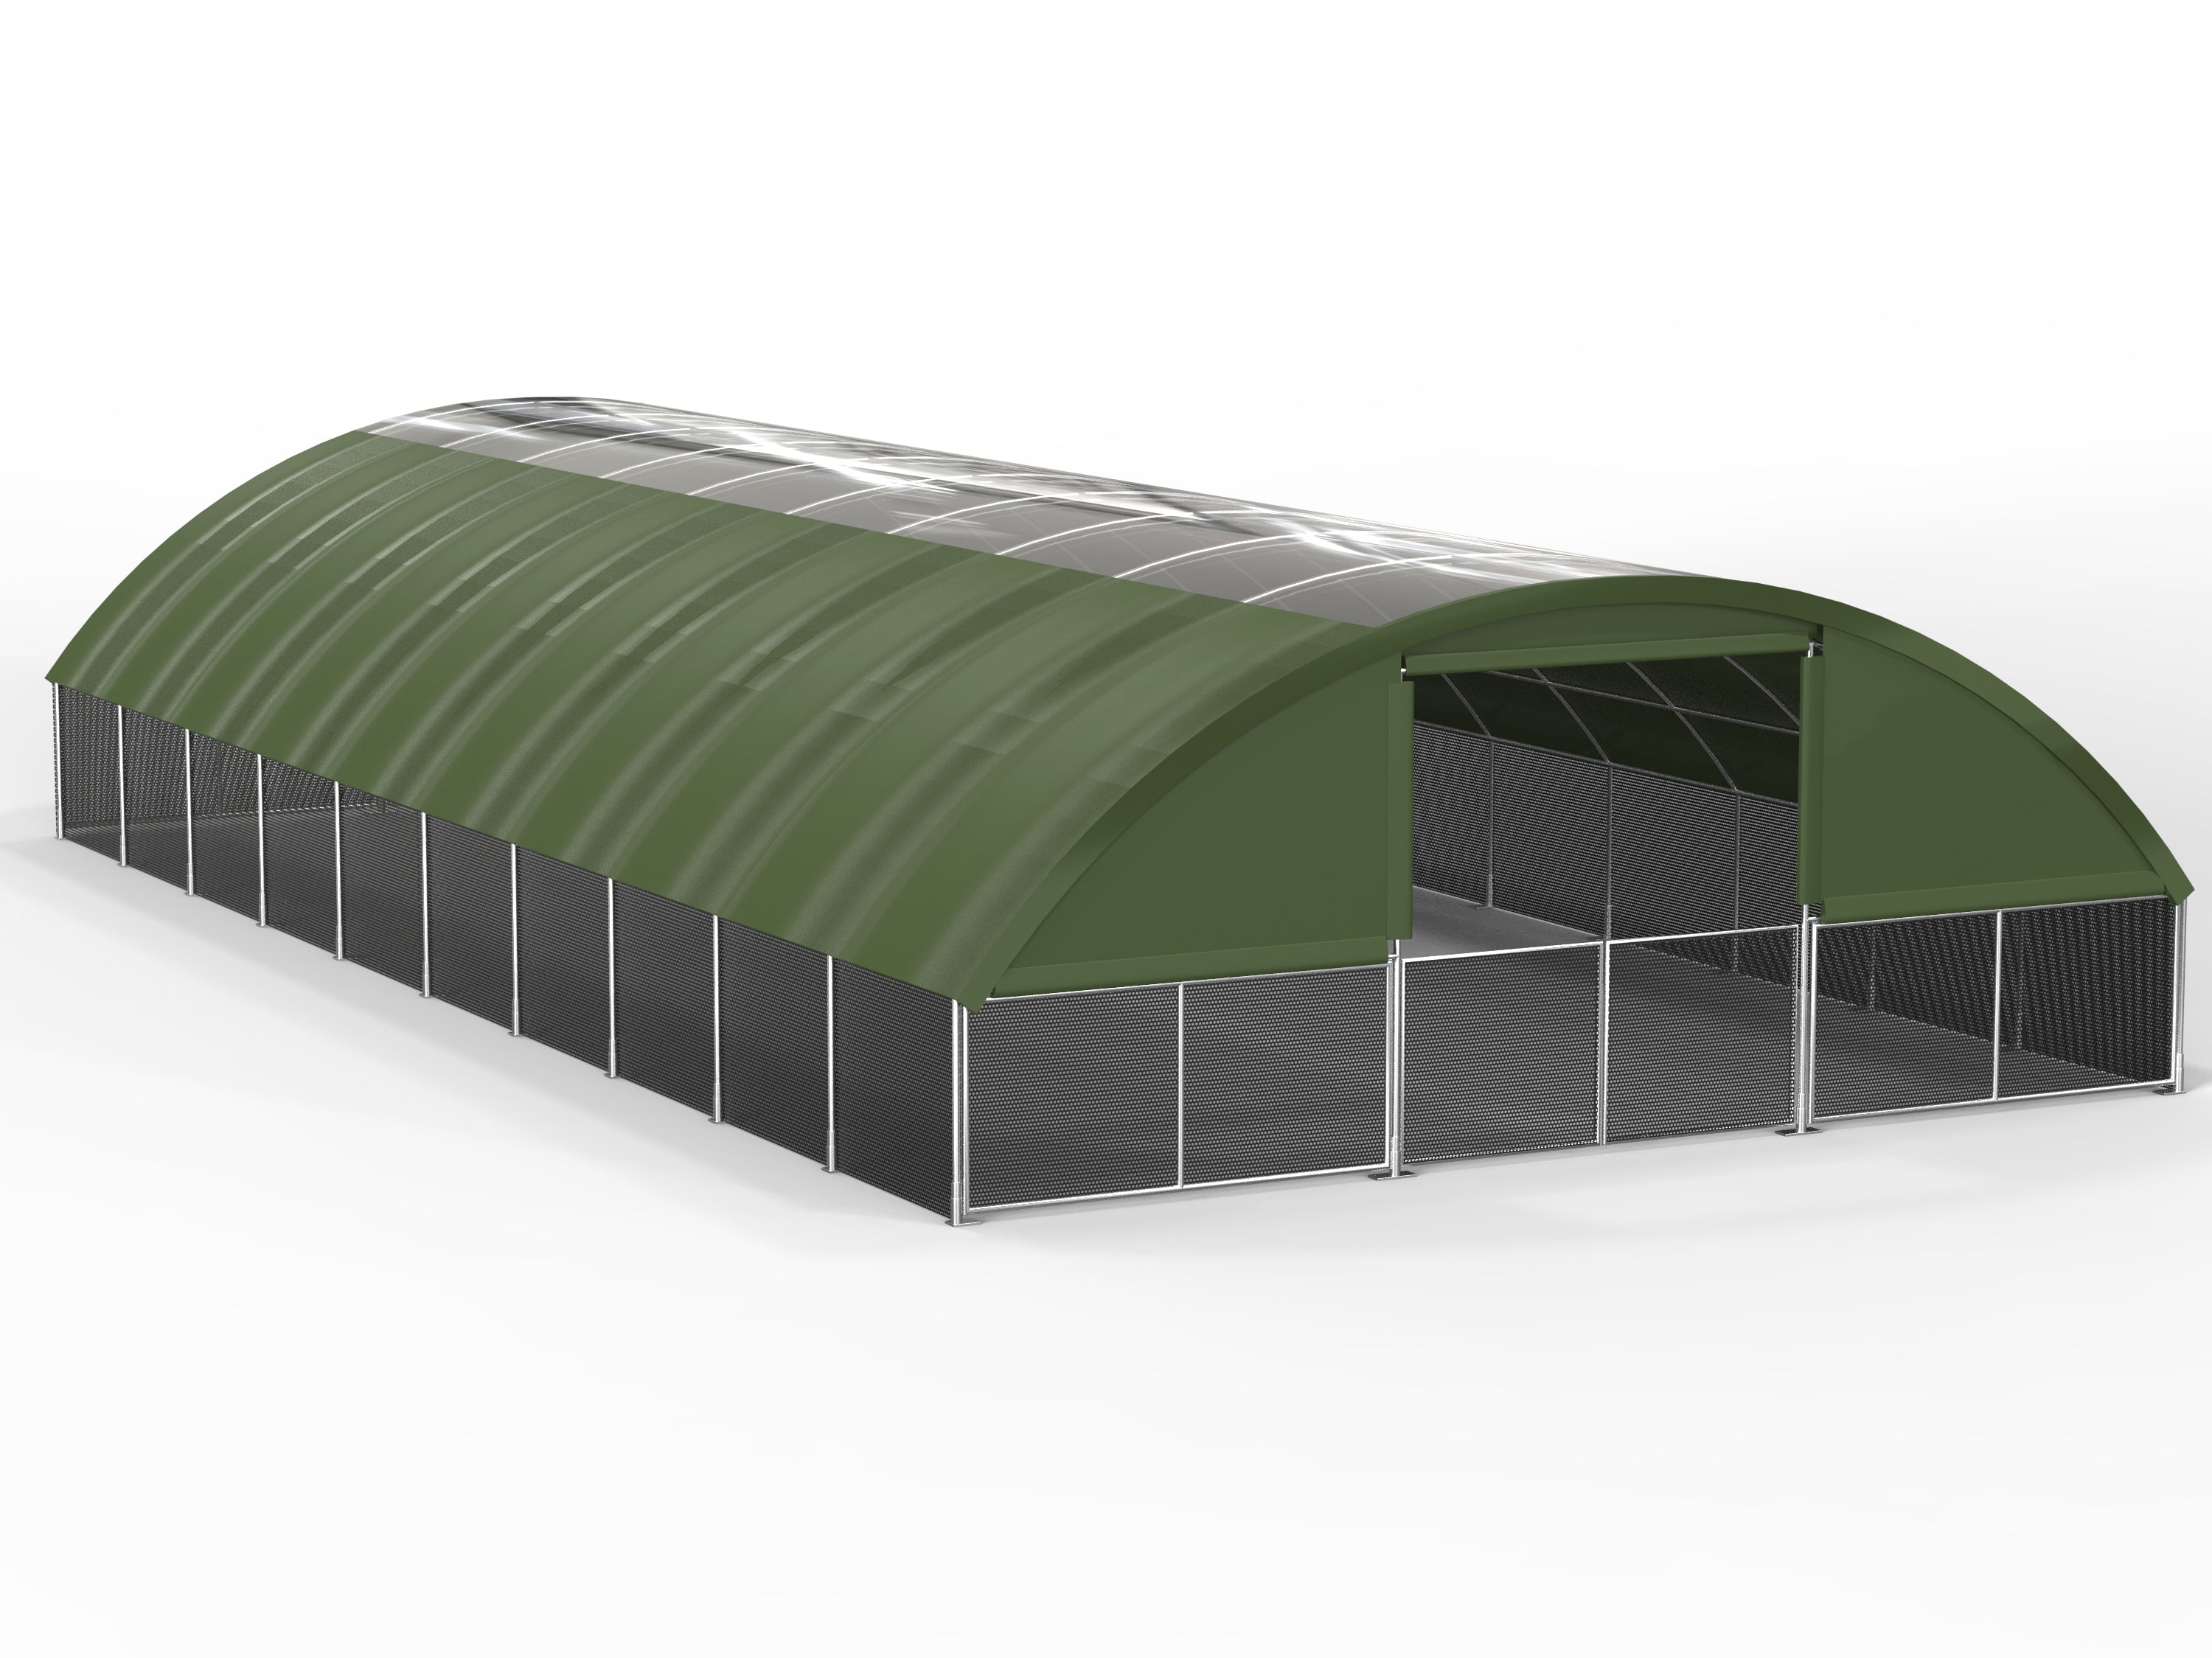 AgriculturalShelters20x10.549